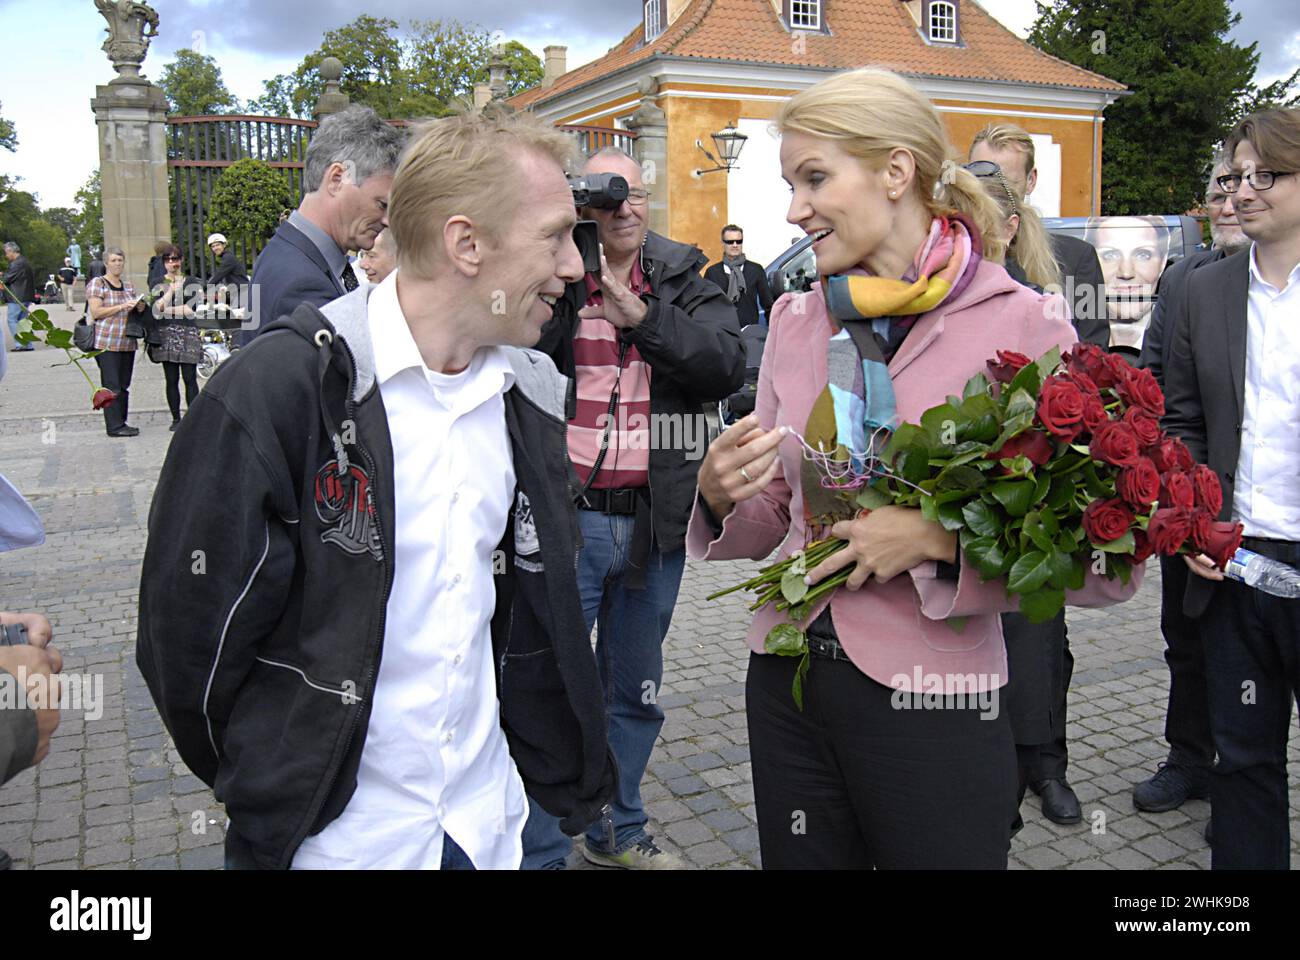 COPENHAGEN  DENMARK. Helle Thorning -Schmidt,oppostion social democrat leader and candiate for prime minister post for social democrat party on her elections compaign,meet her voters and some are really angry social democrat ,Helle met her party soldiers /workers and danish voter, danish General parliament elections will take plass on sept.25, 2011, Helle today spends her morning at frederiksberg have gives free red roses to voters, she met her muslim member of parlia from Turkey and Pakistan, these are cadidate for parliaments 28 August 2011                (PHOTOS BY FRANCIS JOSEPH DEAN/DEAN Stock Photo